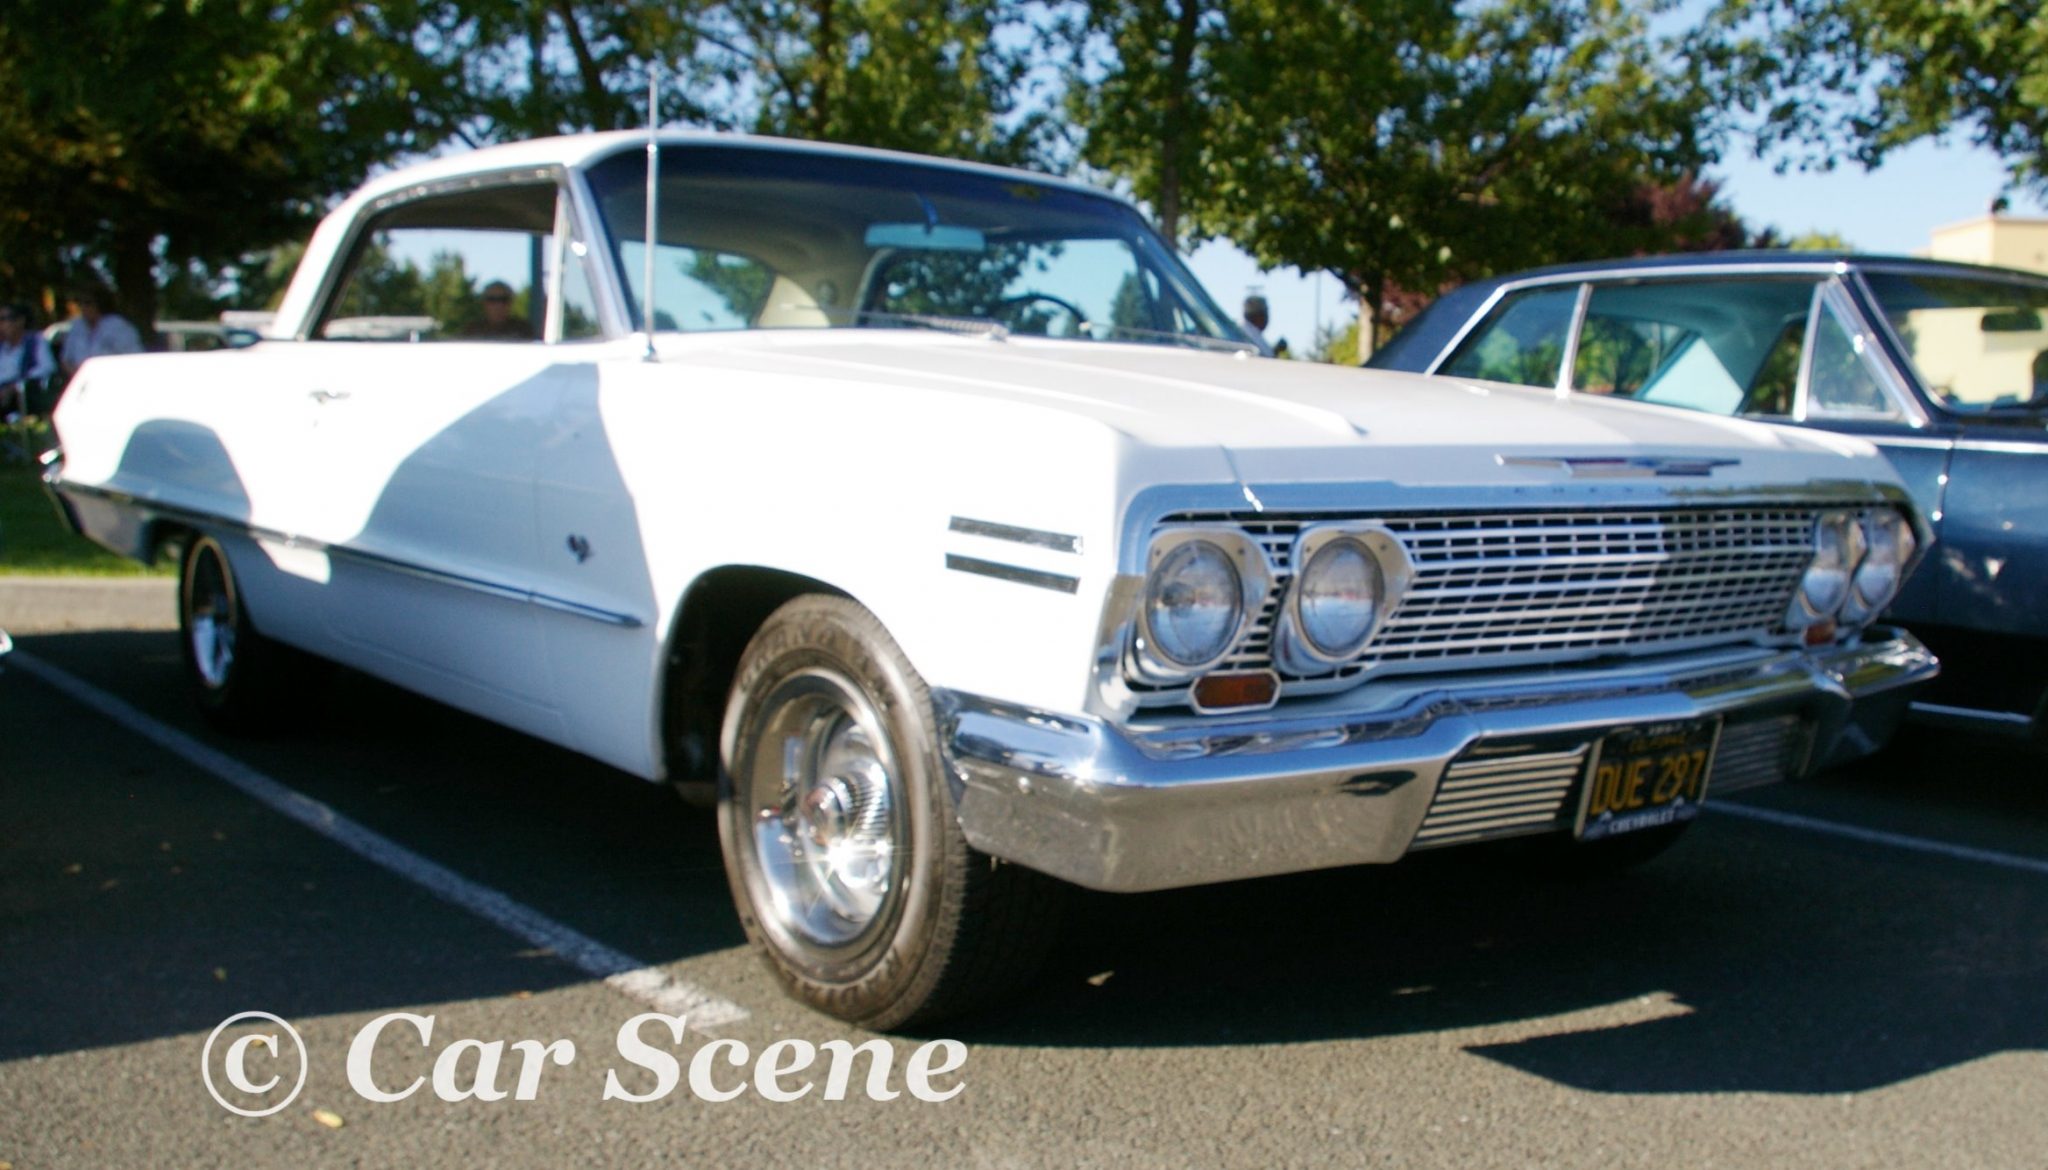 1963 Chevrolet Impala Coupe front three quarters view